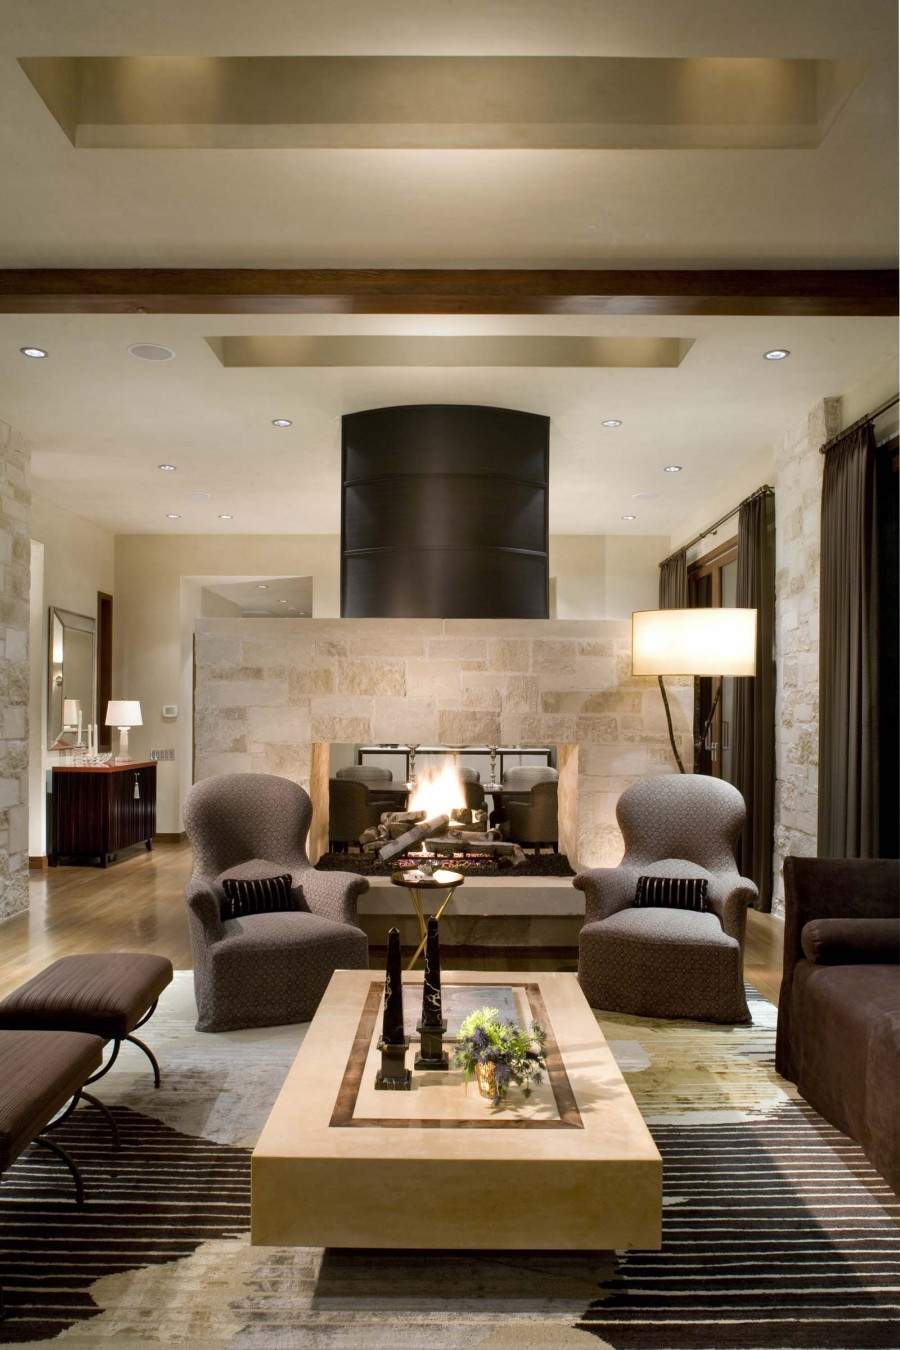 Modern Living Room With Fireplace
 16 Fabulous Earth Tones Living Room Designs Decoholic